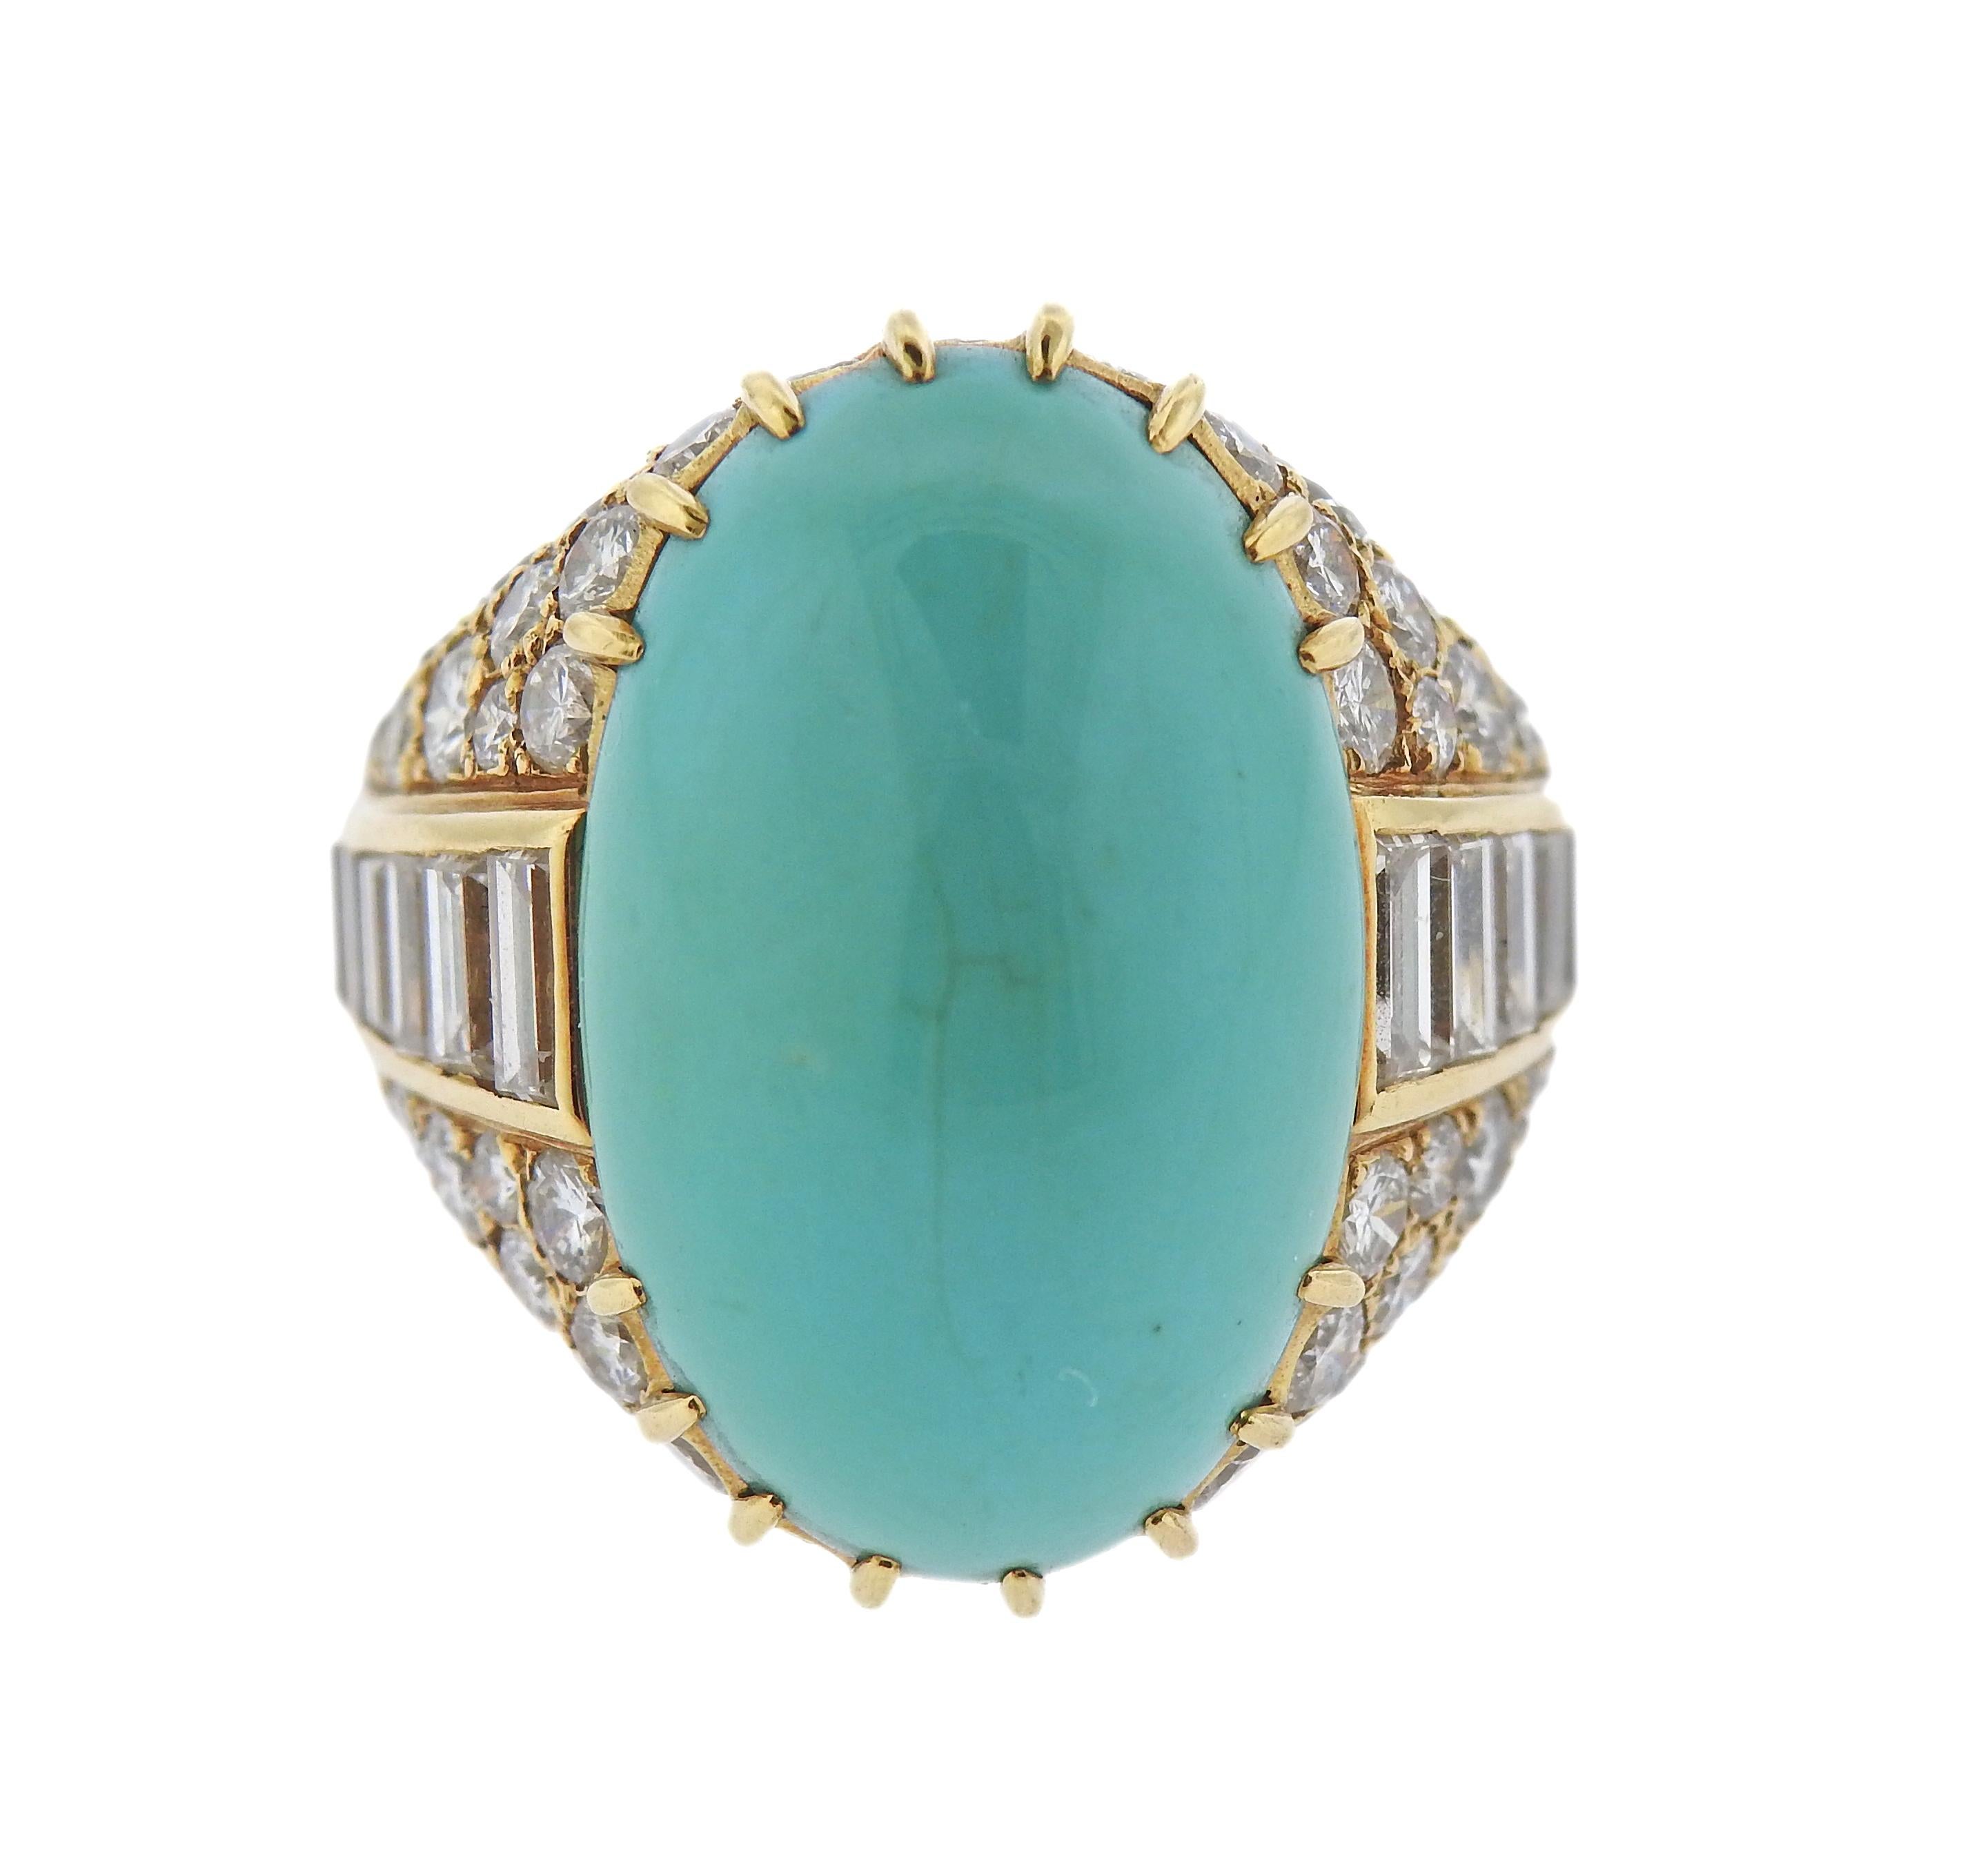 Magnificent 18k gold ring by Monture Cartier, with center 22 x 14mm turquoise ( with natural hairlines on the surface) and approx. 4.30ctw in diamonds. Ring size - 6.75, ring top is 23mm wide. Marked: Monture Cartier, French mark on the outside of